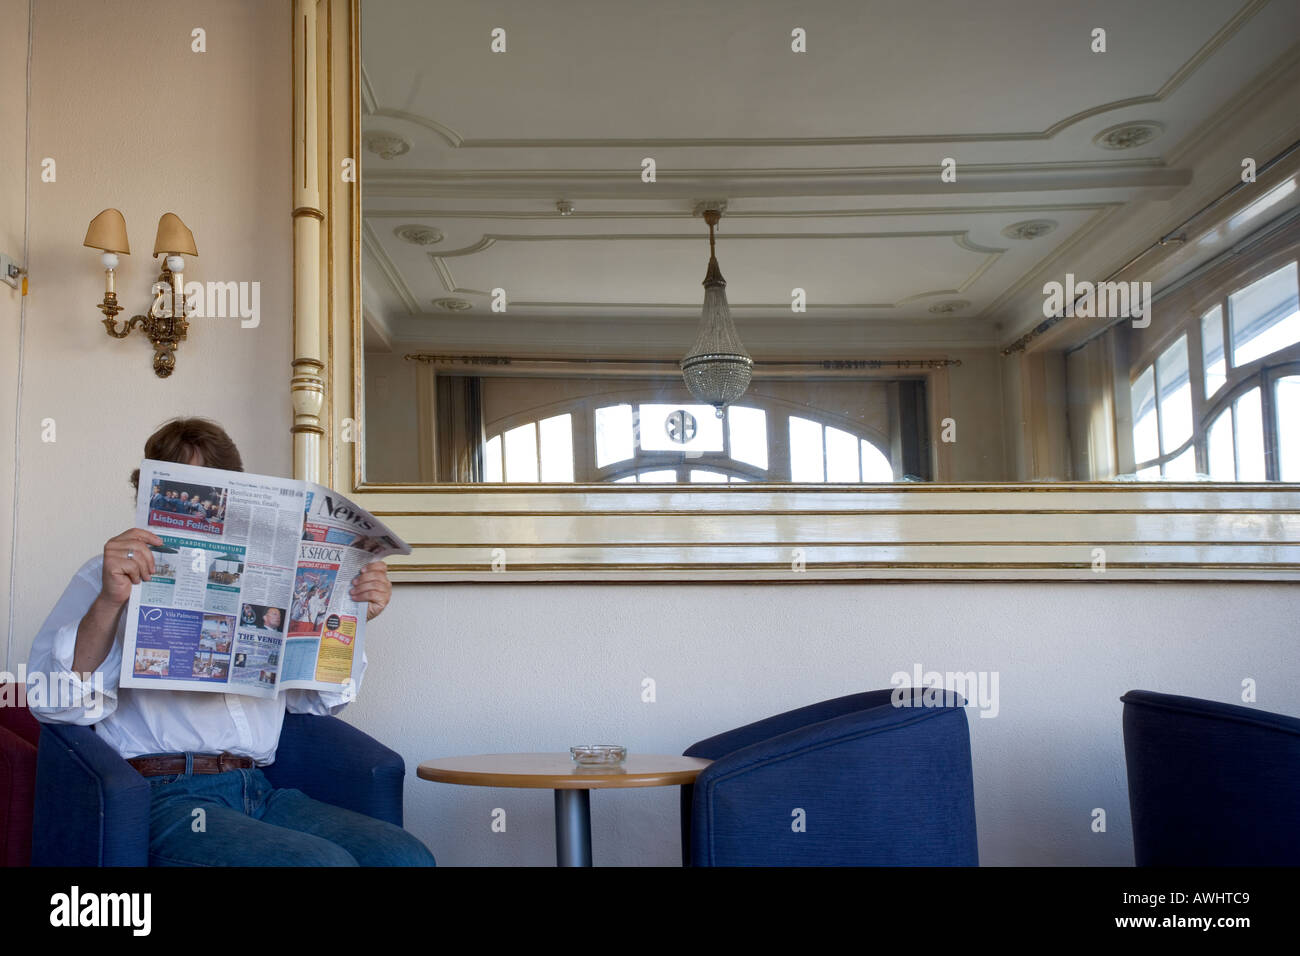 A man reading the newspaper in an otherwise empty room with a large gilt framed mirror. Stock Photo